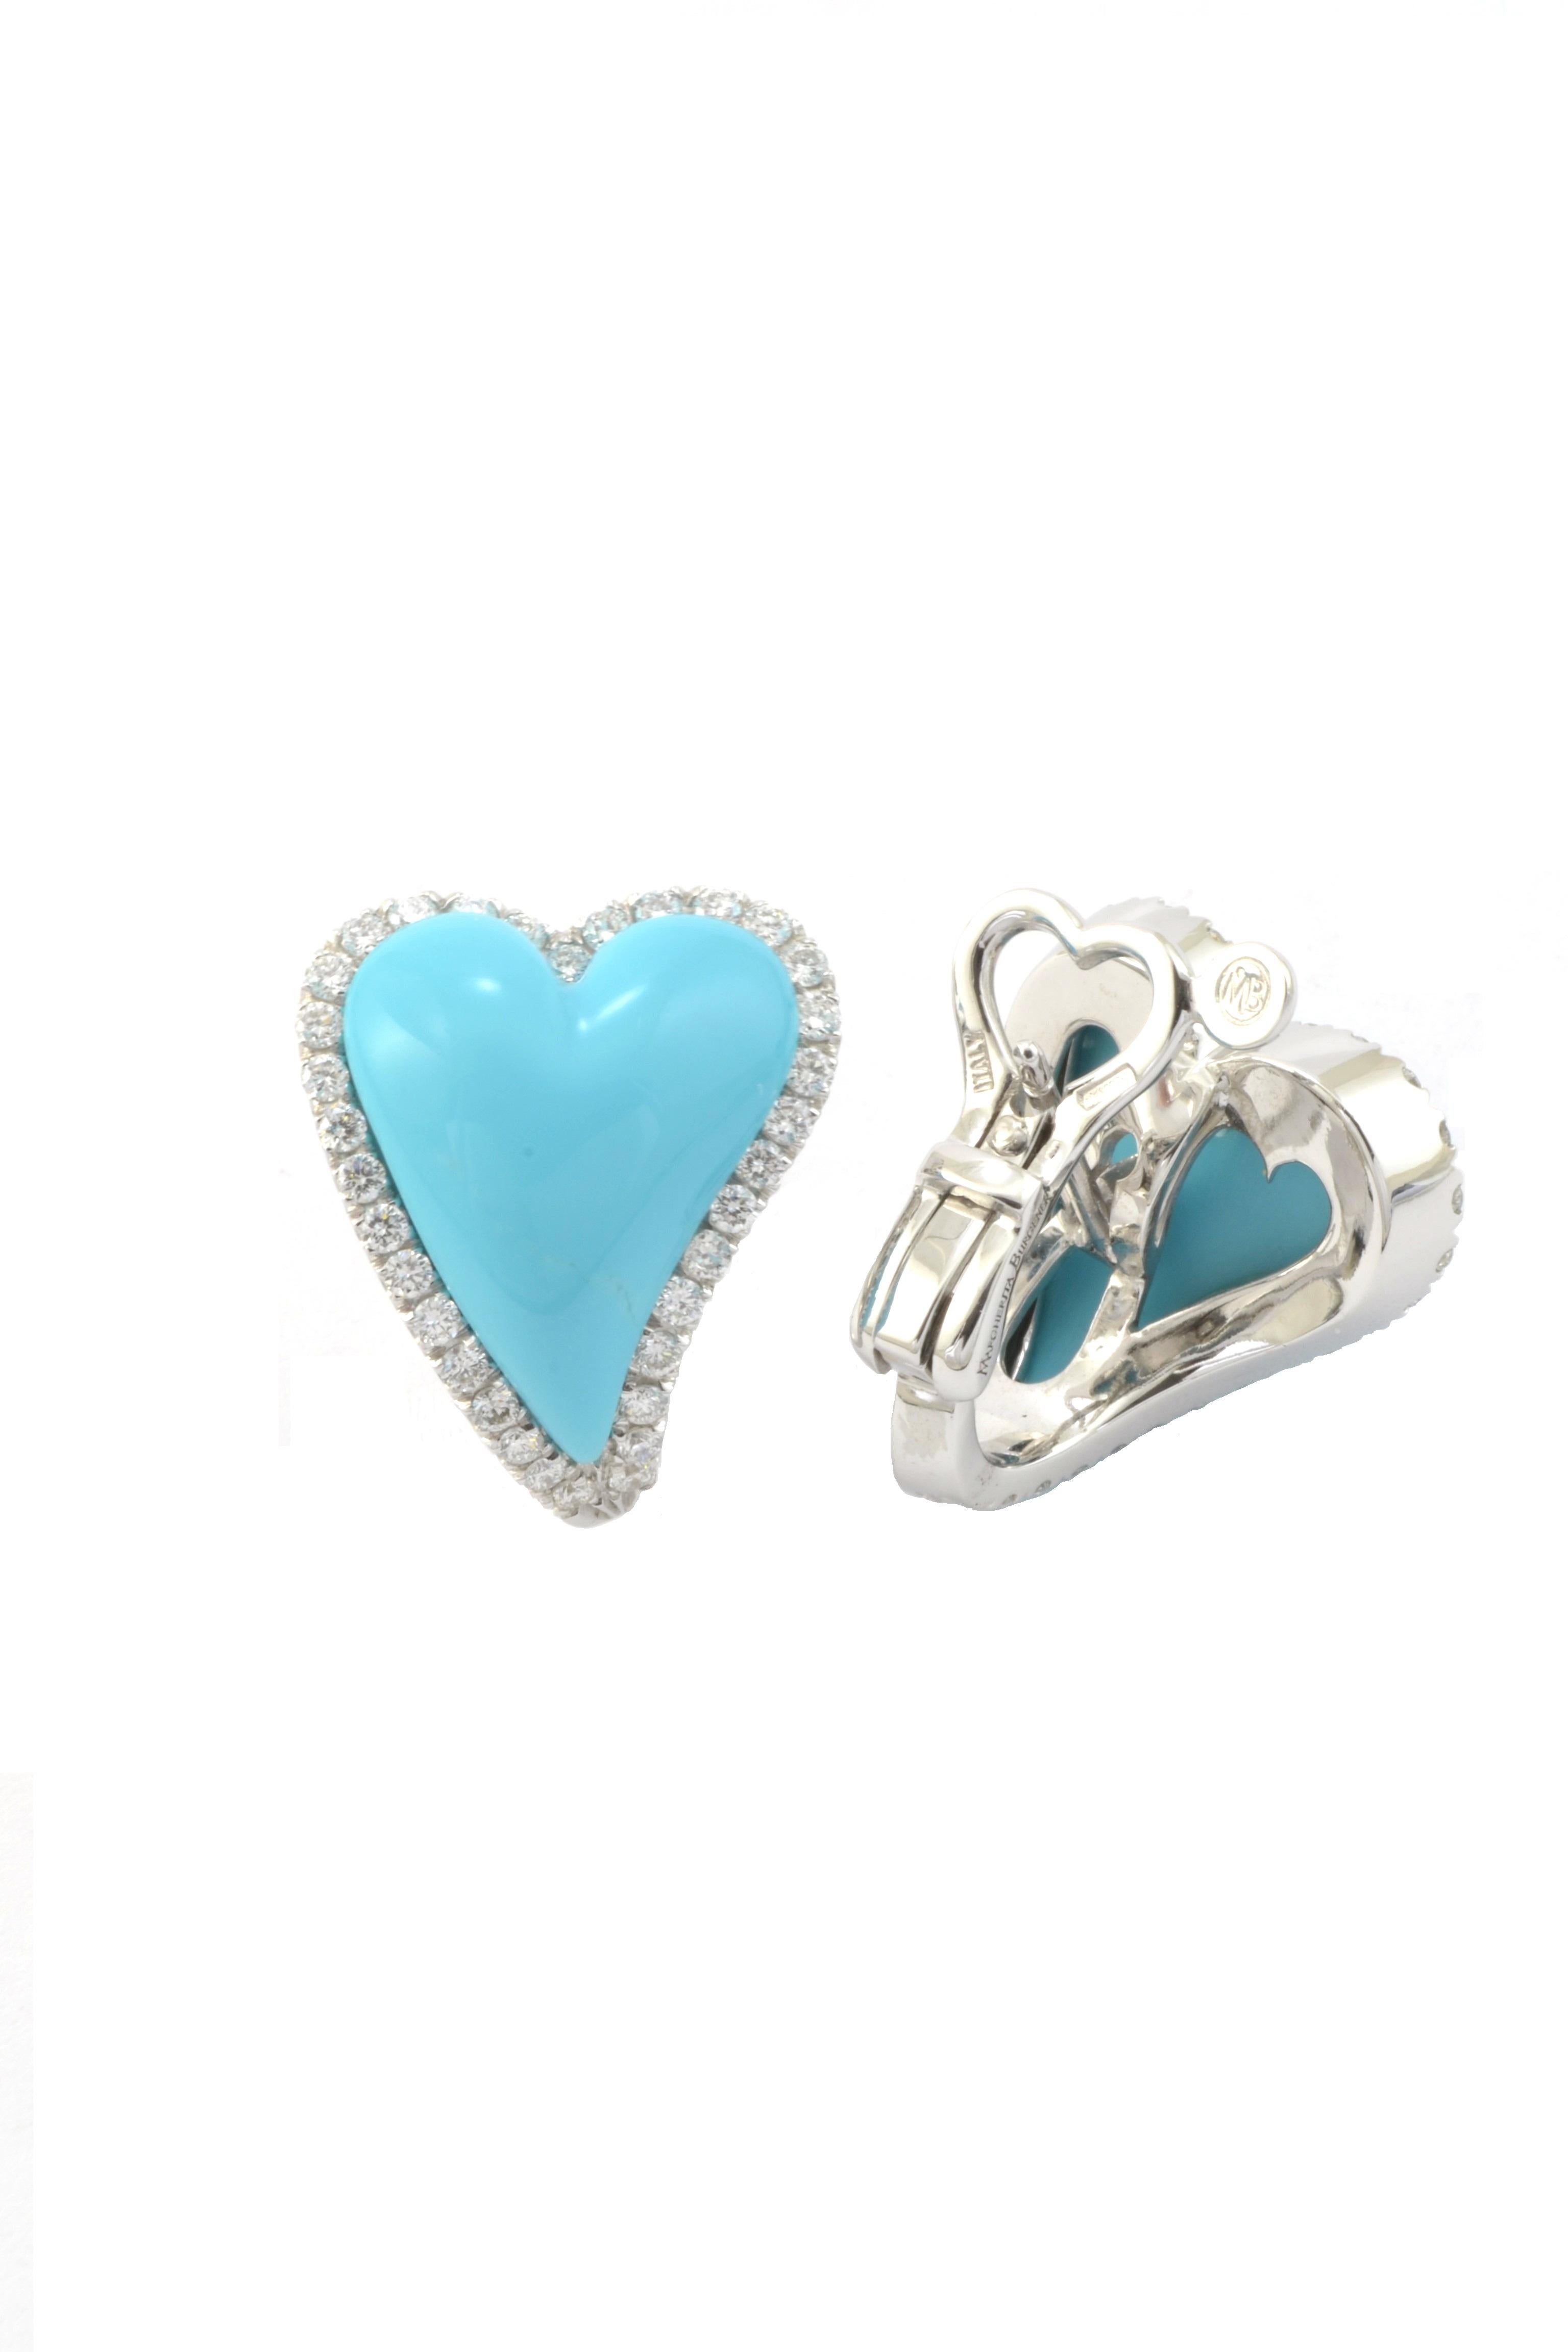 Contemporary Turquoise Diamonds White Gold Two Hearts Made in Italy Earrings For Sale